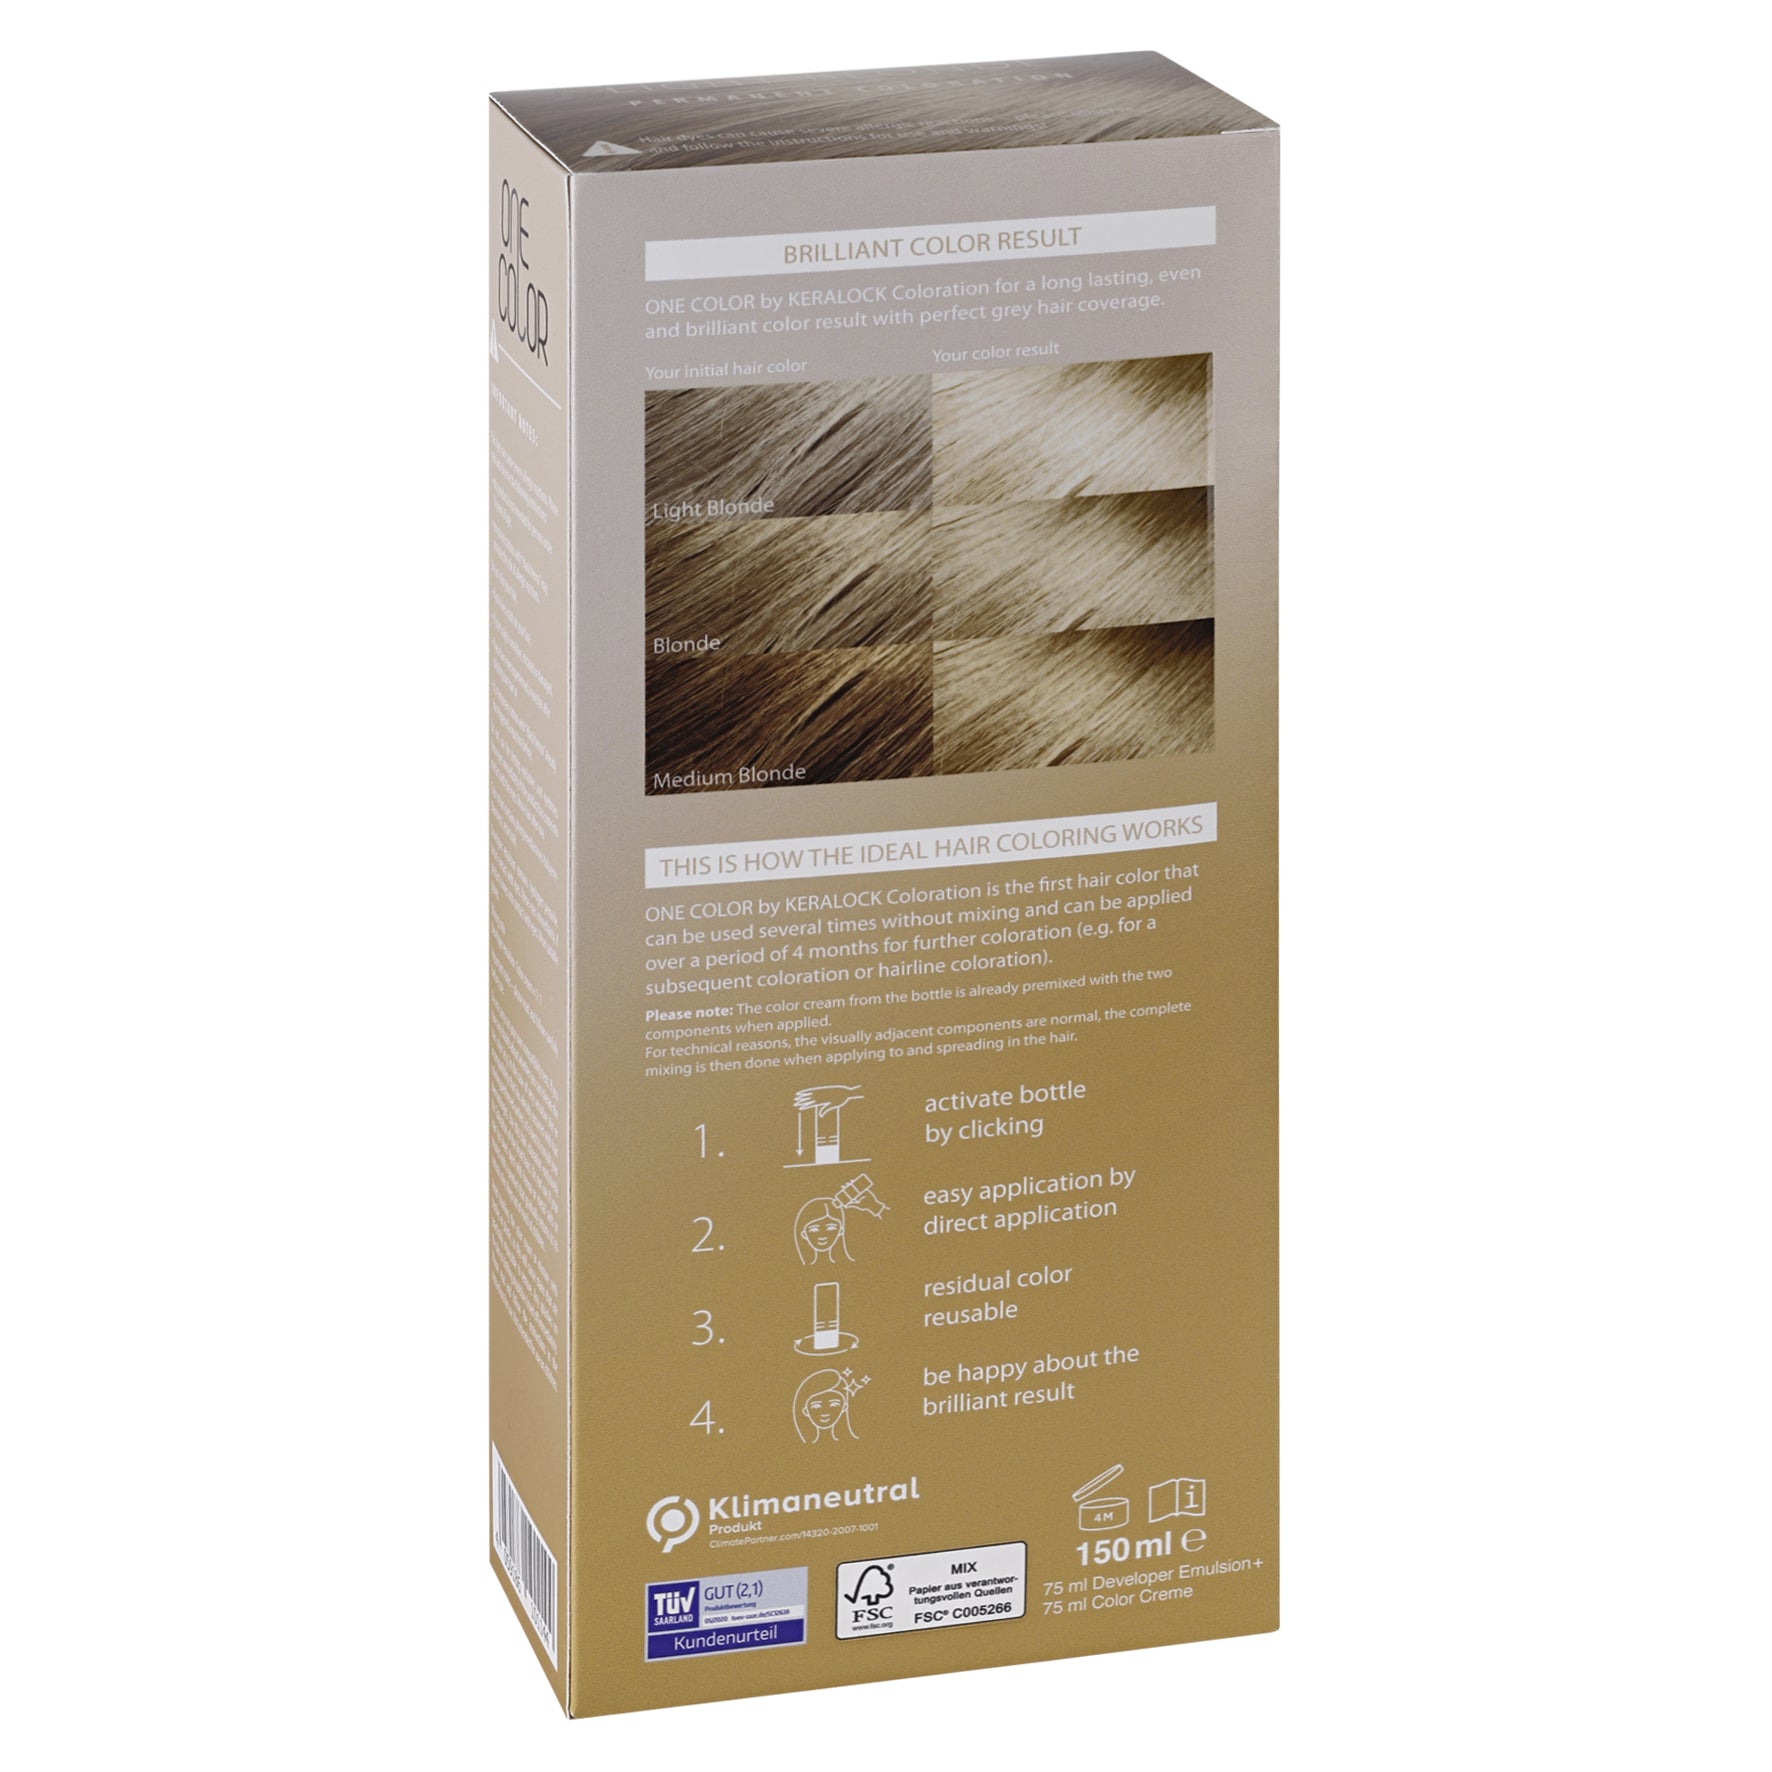 KERALOCK LIGHT BLONDE PERMANENT HAIR COLOR, MADE IN GERMANY